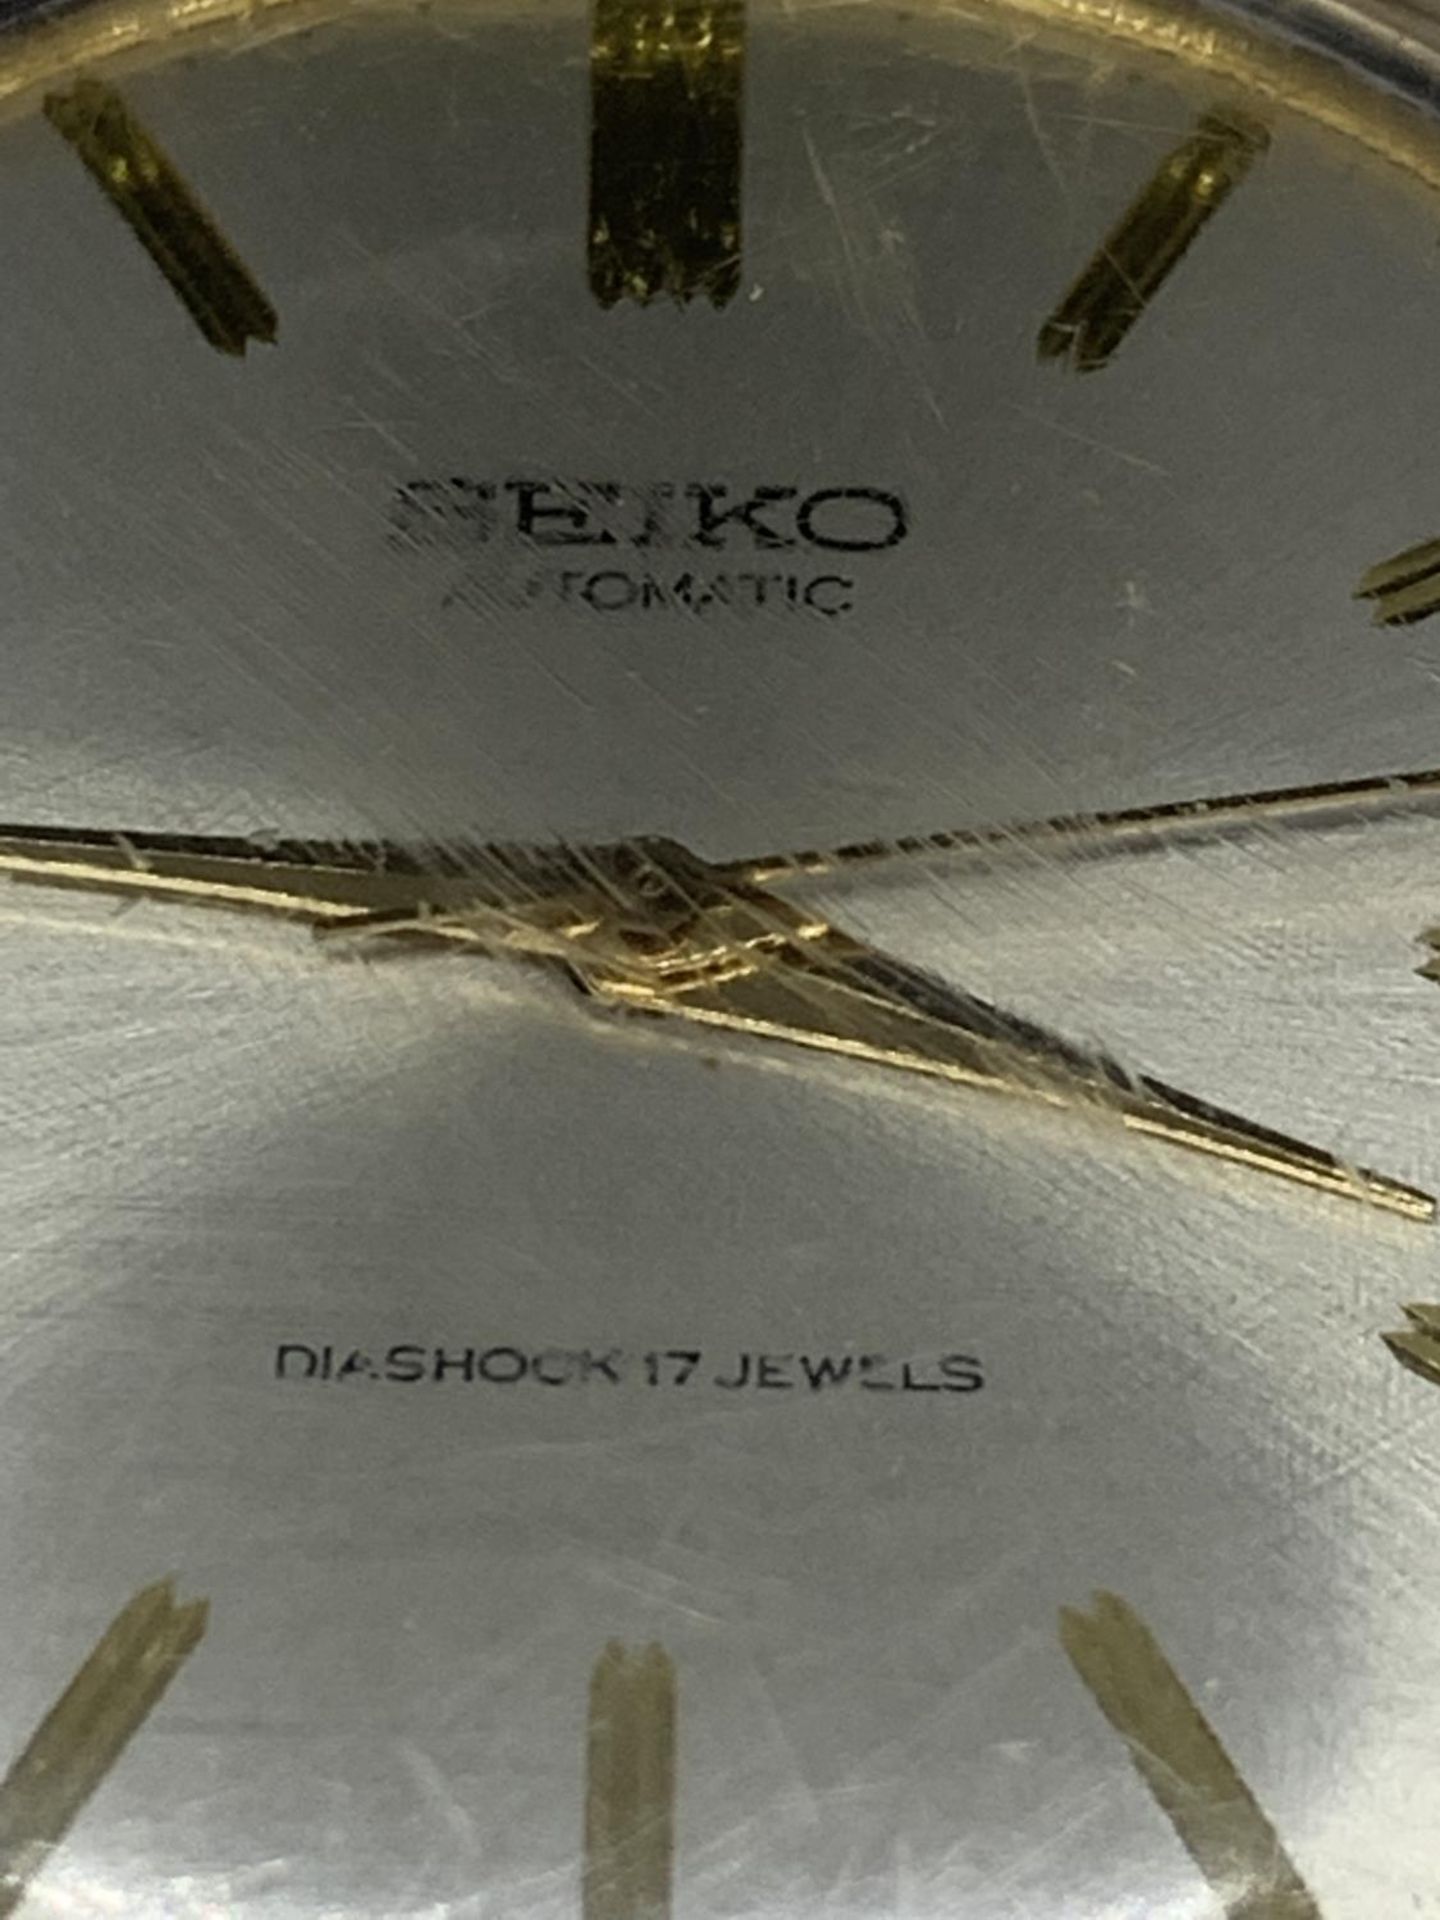 A VINTAGE YELLOW METAL SEIKO AUTOMATIC DIASHOCK 17 JEWELS WRISTWATCH SEEN WORKING BUT NO WARRANTY - Image 3 of 3